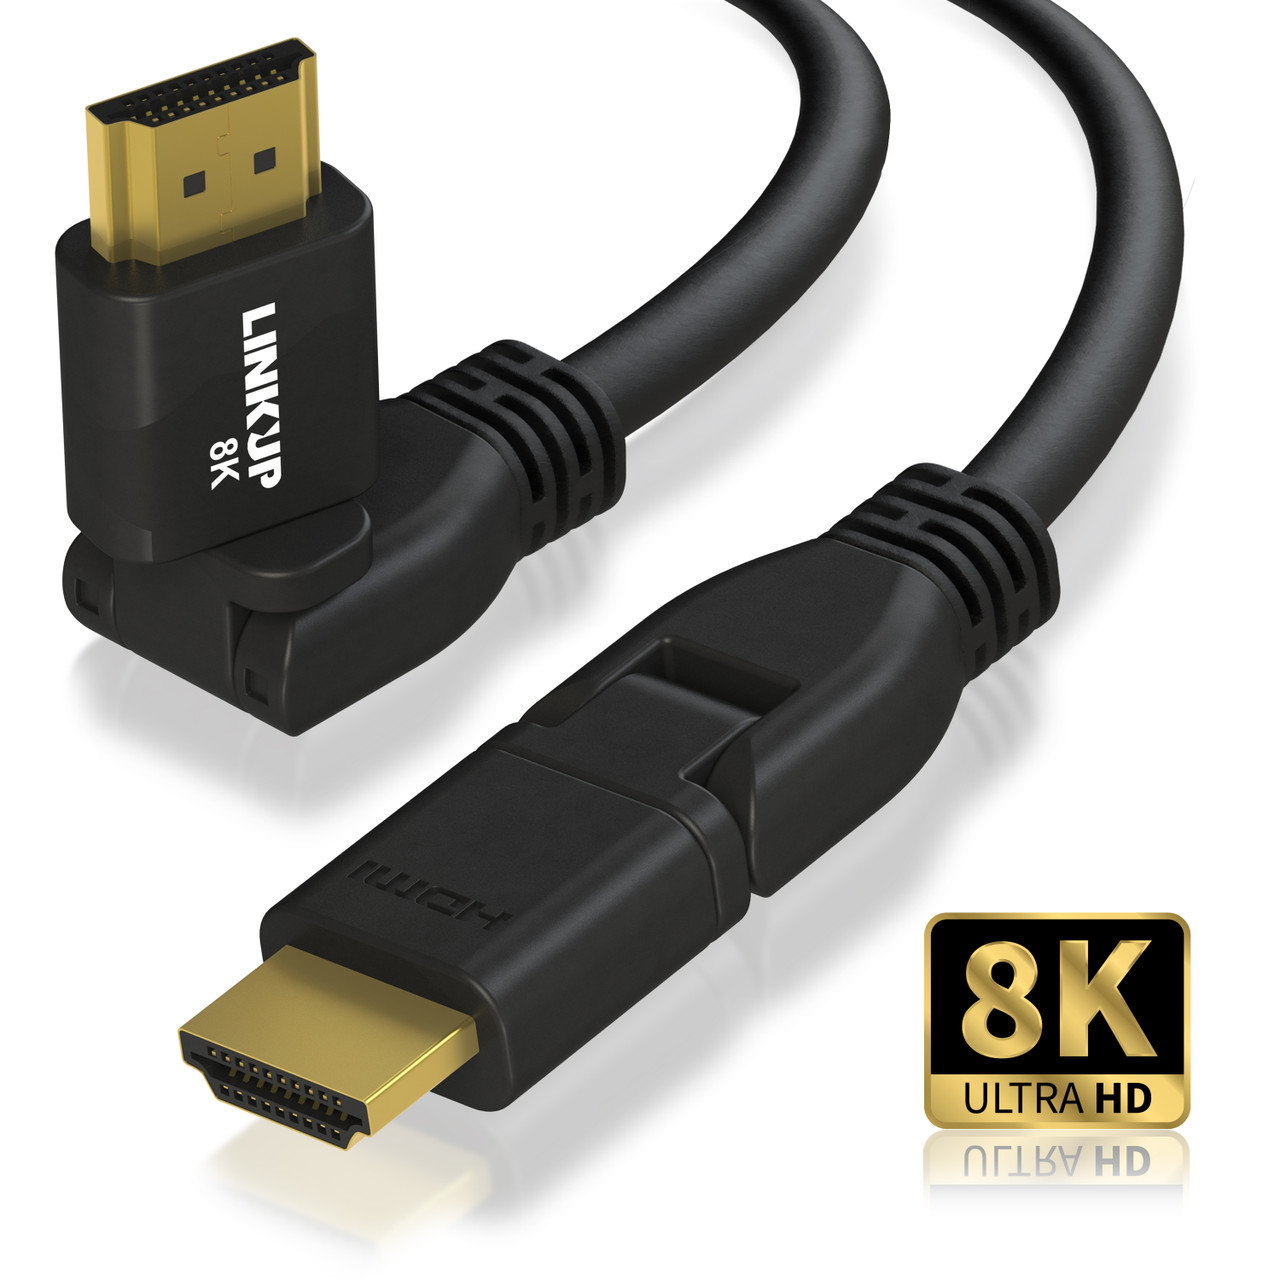 Eareyesail 8K HDMI 2.1 Cable 3 FT,48Gbps Ultra High Speed Gaming Braided  Cables Support 8K@60HZ/4K@120Hz,eARC,Dynamic HDR,HDCP 2.2/2.3,3D,VRR for